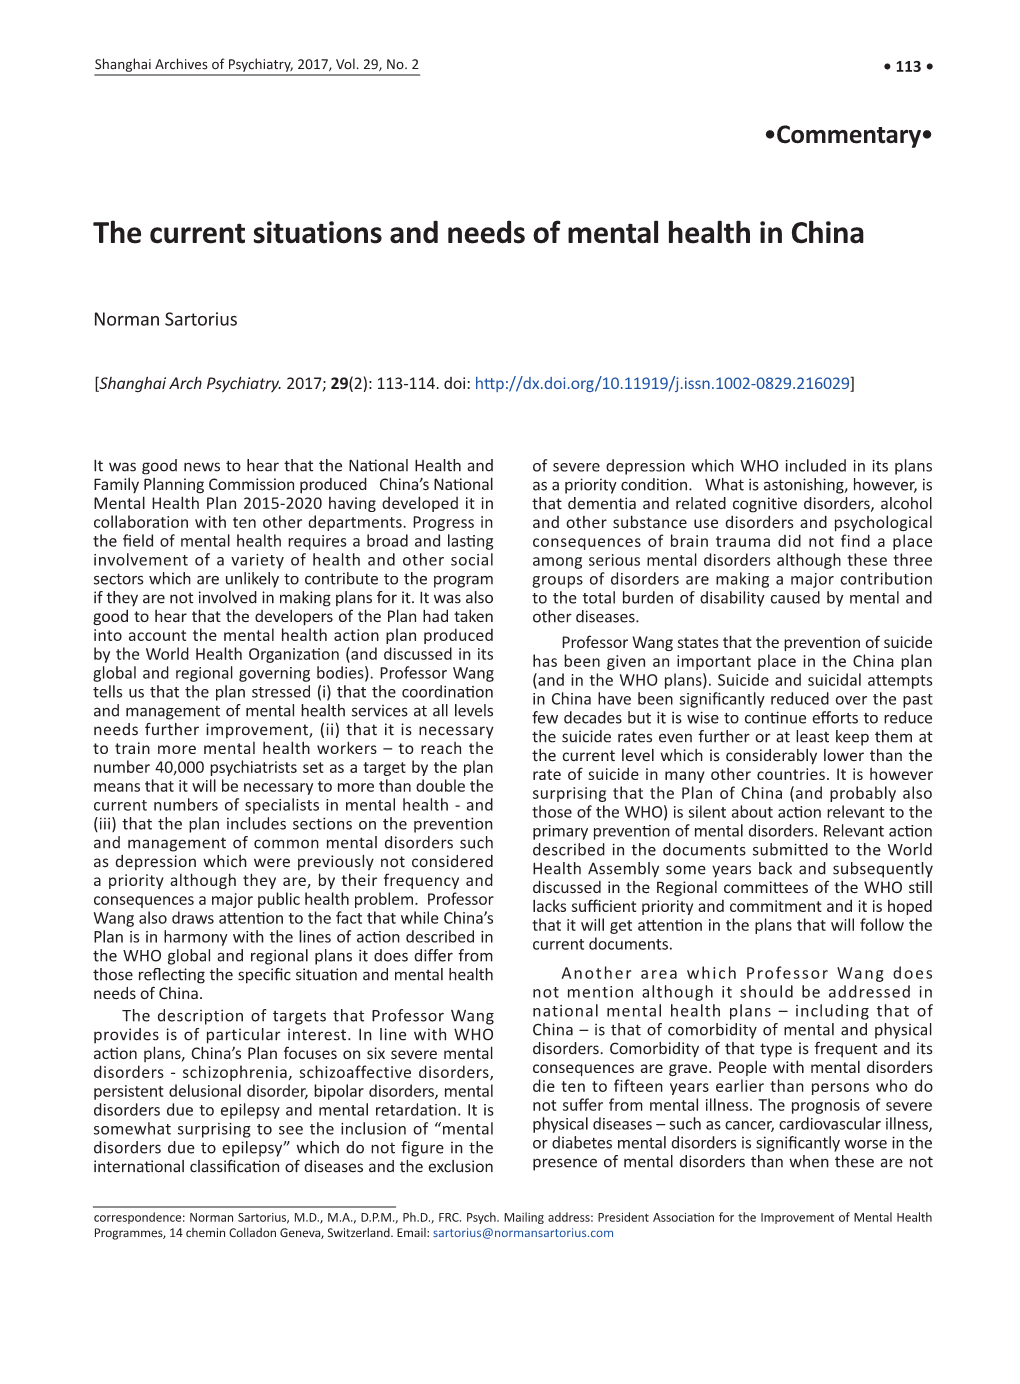 The Current Situations and Needs of Mental Health in China